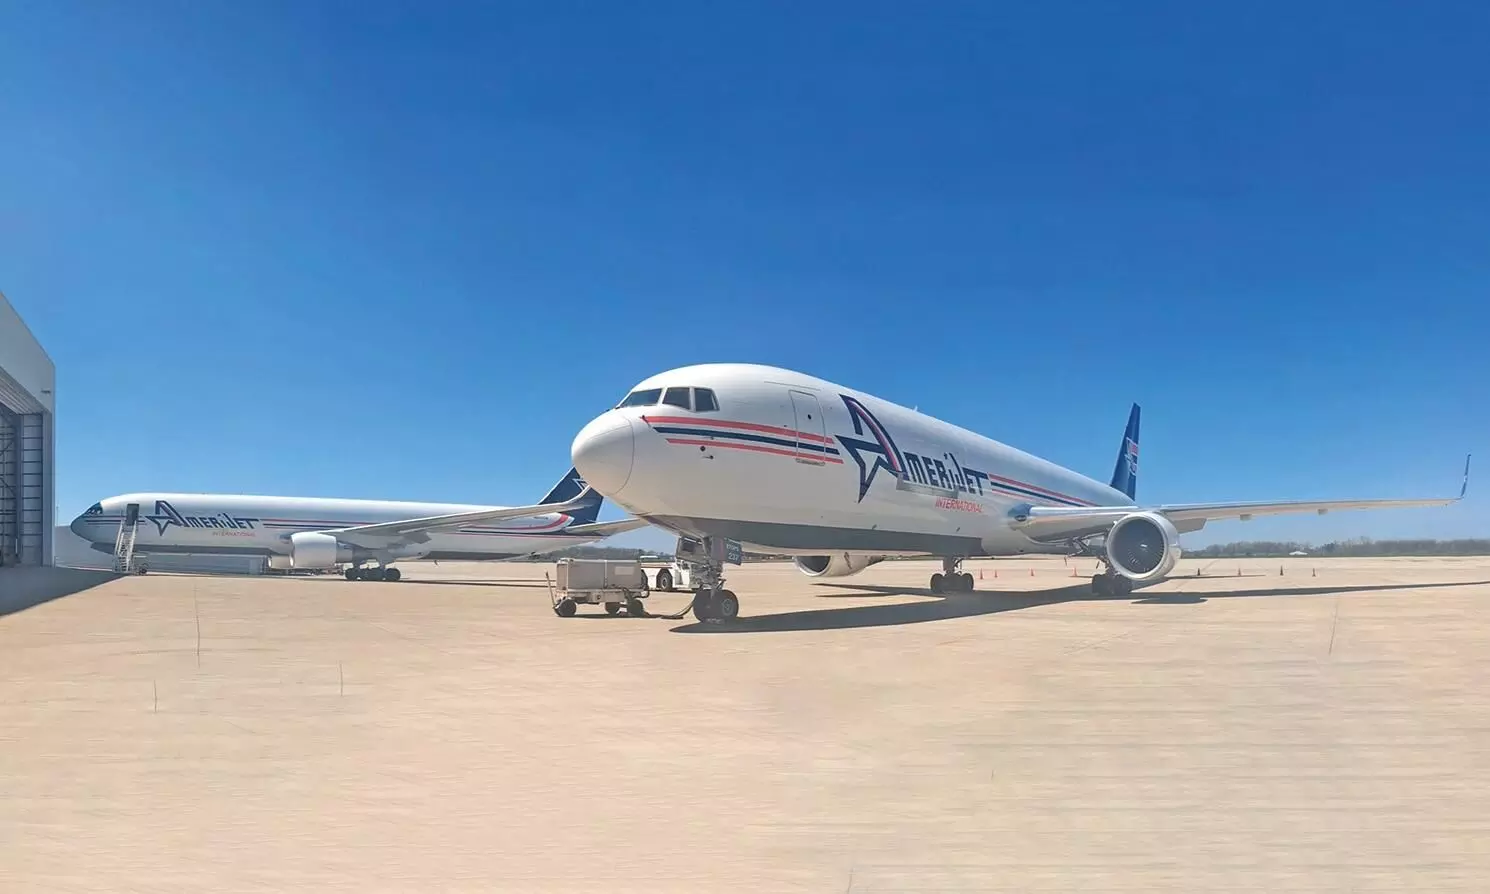 ATSG delivers first Boeing Converted Freighter to Amerijet